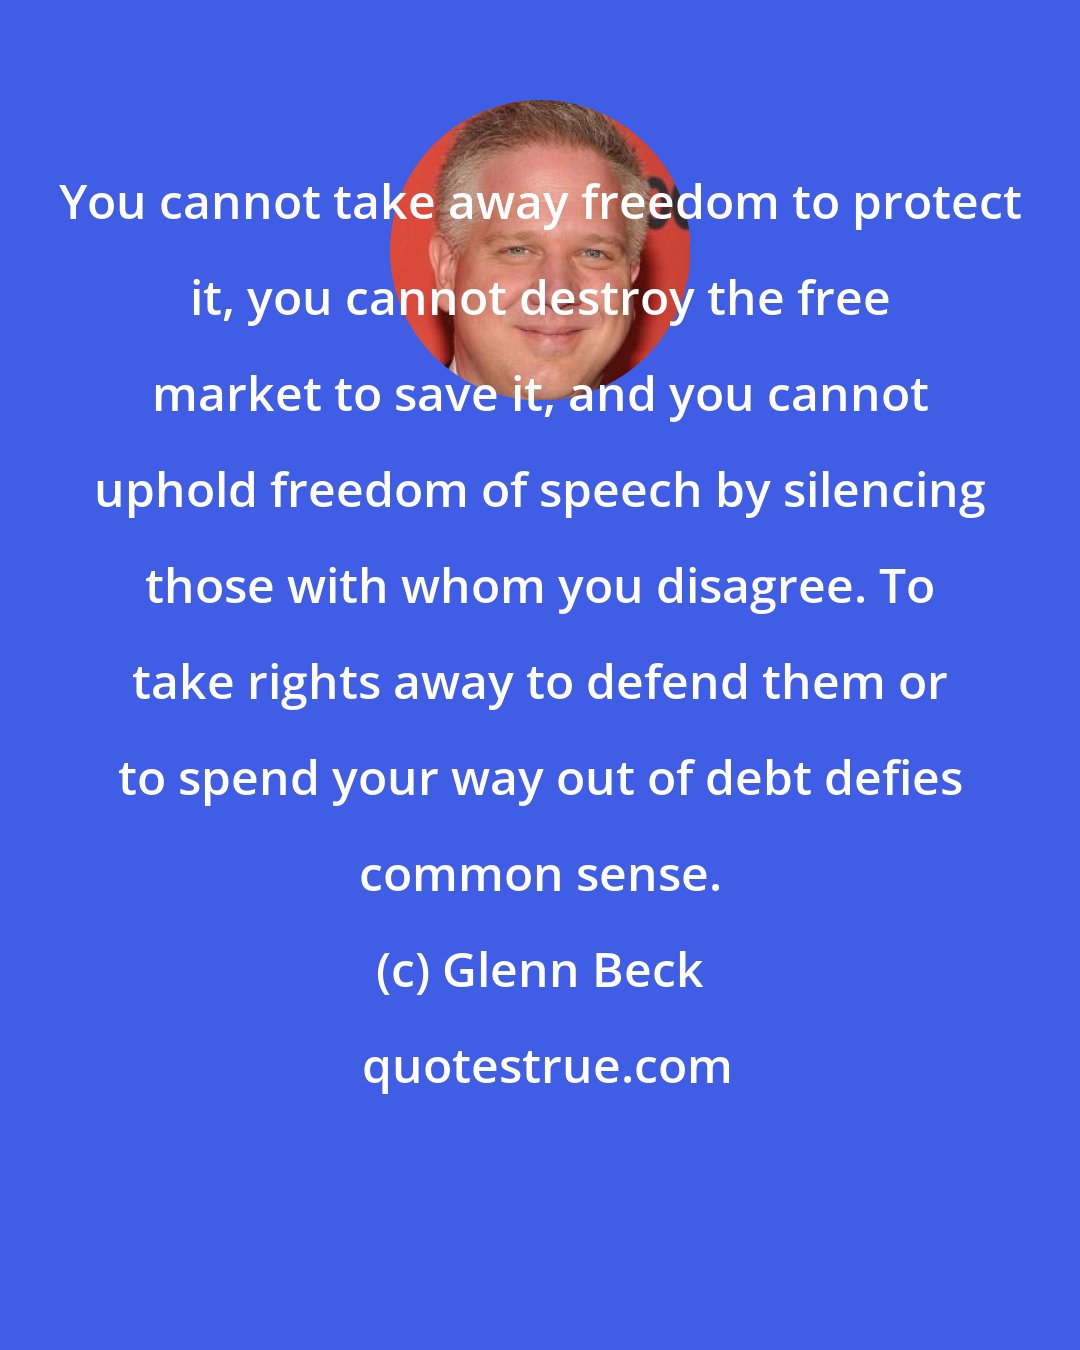 Glenn Beck: You cannot take away freedom to protect it, you cannot destroy the free market to save it, and you cannot uphold freedom of speech by silencing those with whom you disagree. To take rights away to defend them or to spend your way out of debt defies common sense.